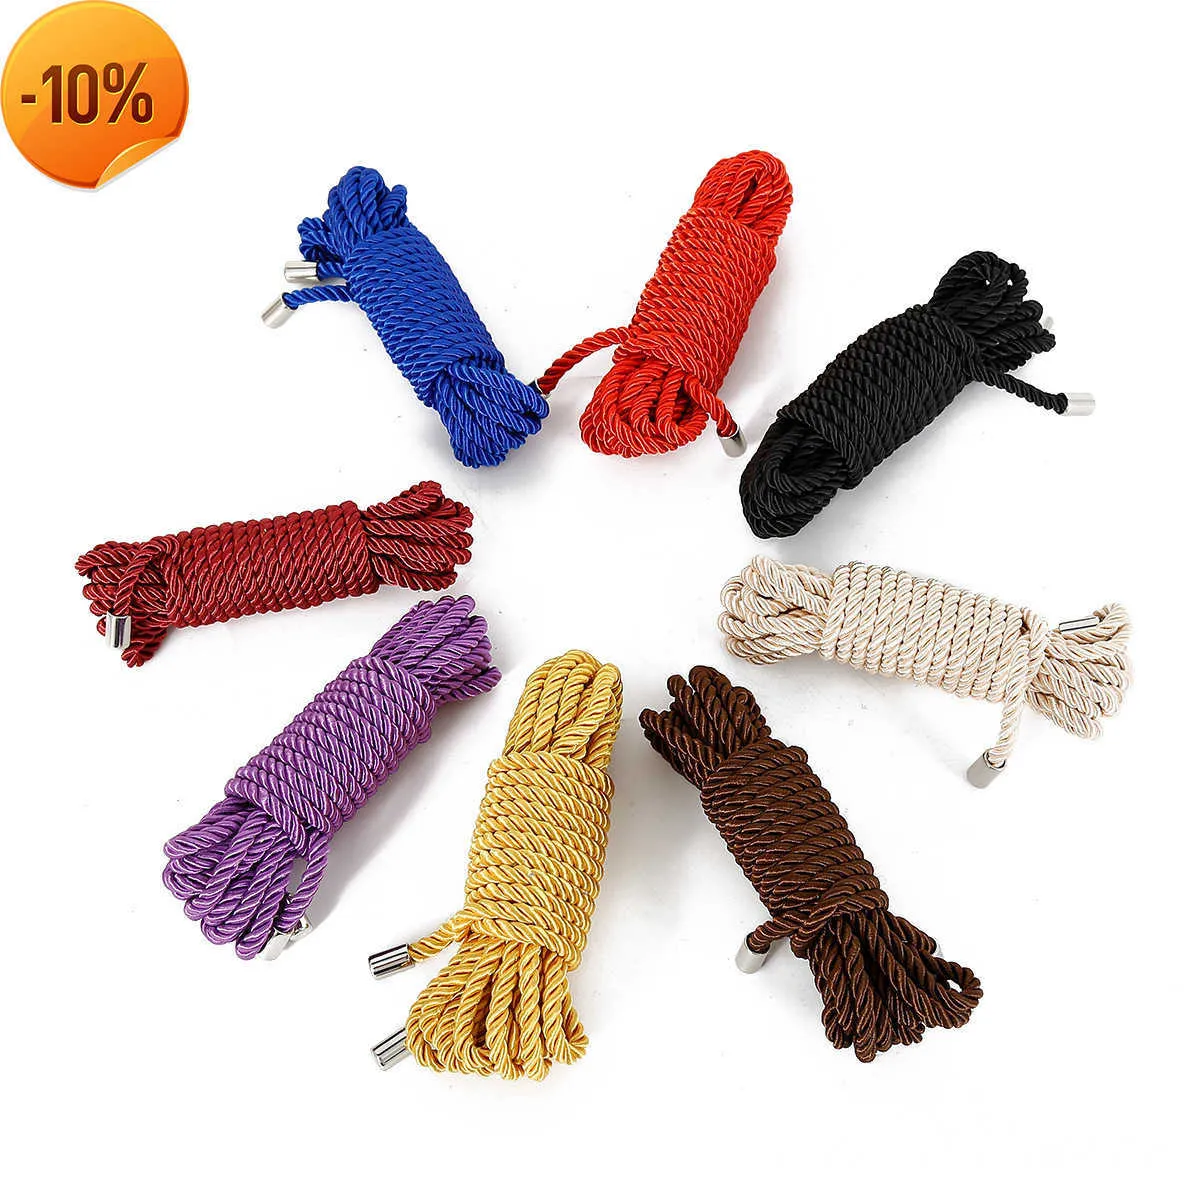 Massage 5m/10m/Quality Cotton Rope Female Adult Sex products Slaves BDSM Bondage Soft Rope Adult Games Binding Rope Role-Playing Sex Toy